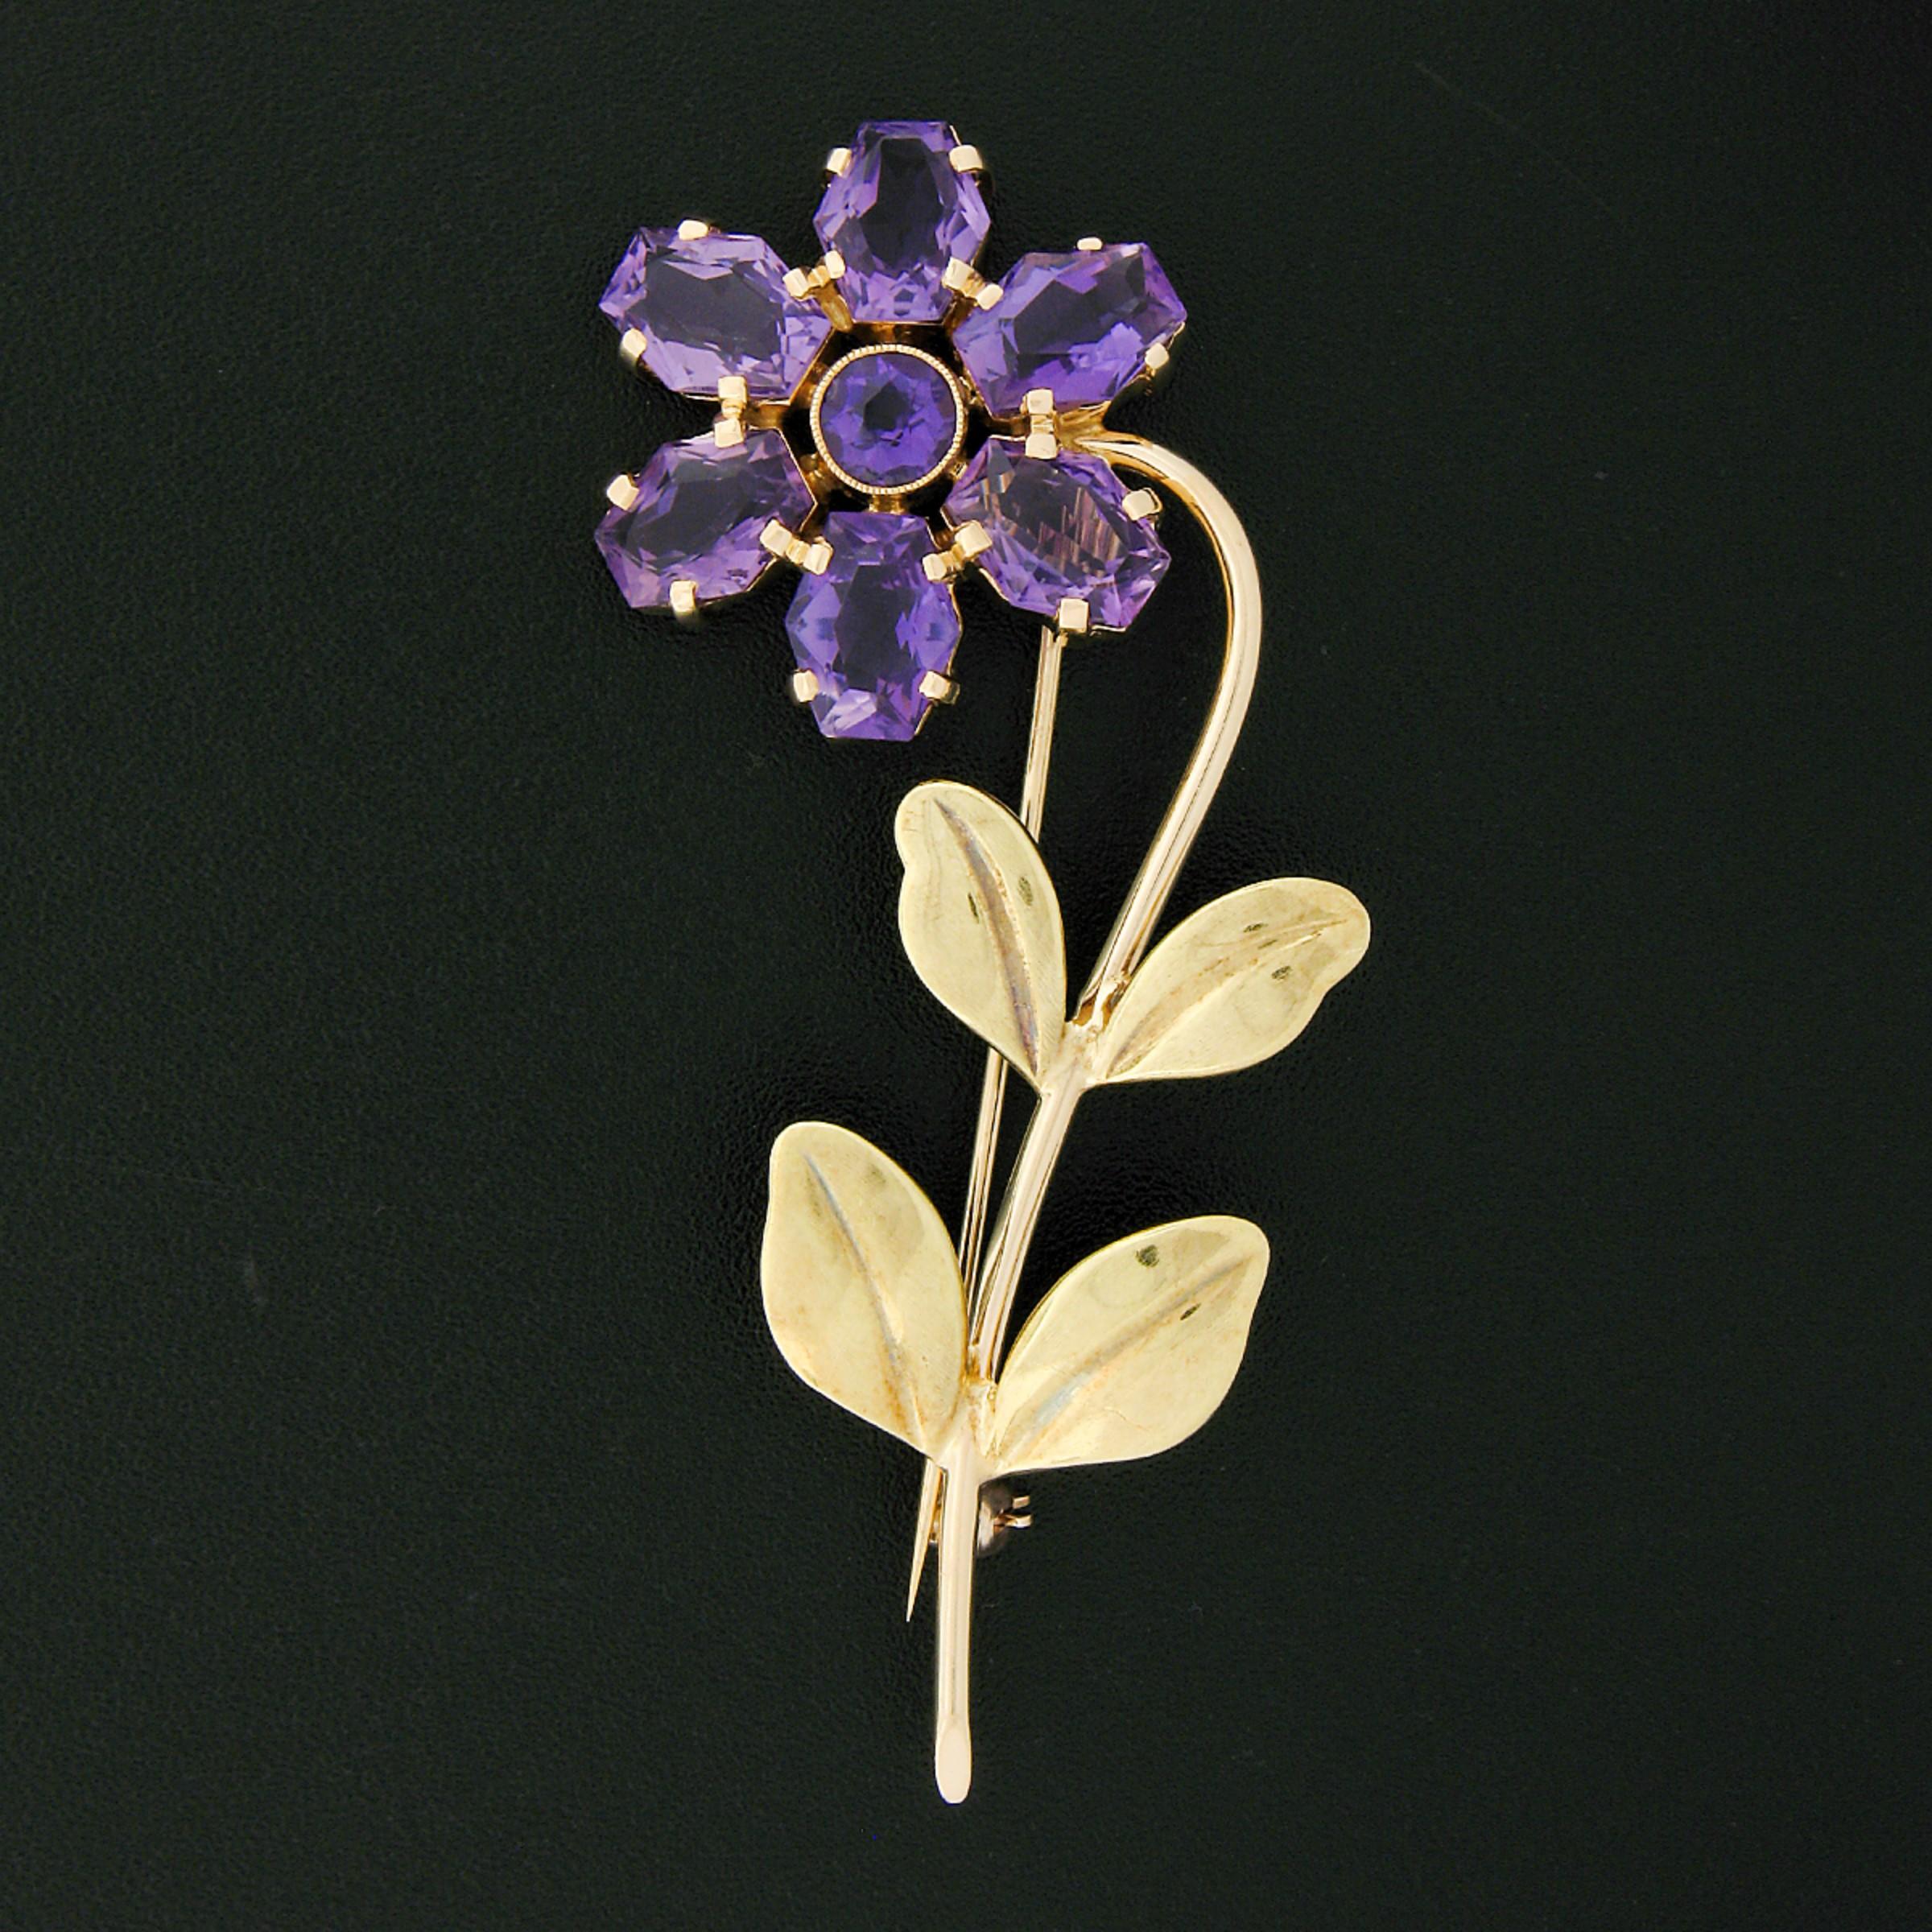 Here we have a large vintage, Allsopp-Bliss Co., brooch that was crafted from solid 14k gold. It features a beautiful flower design that is neatly set with fine amethyst stones as the petals. A round brilliant cut amethyst is milgrain bezel set at